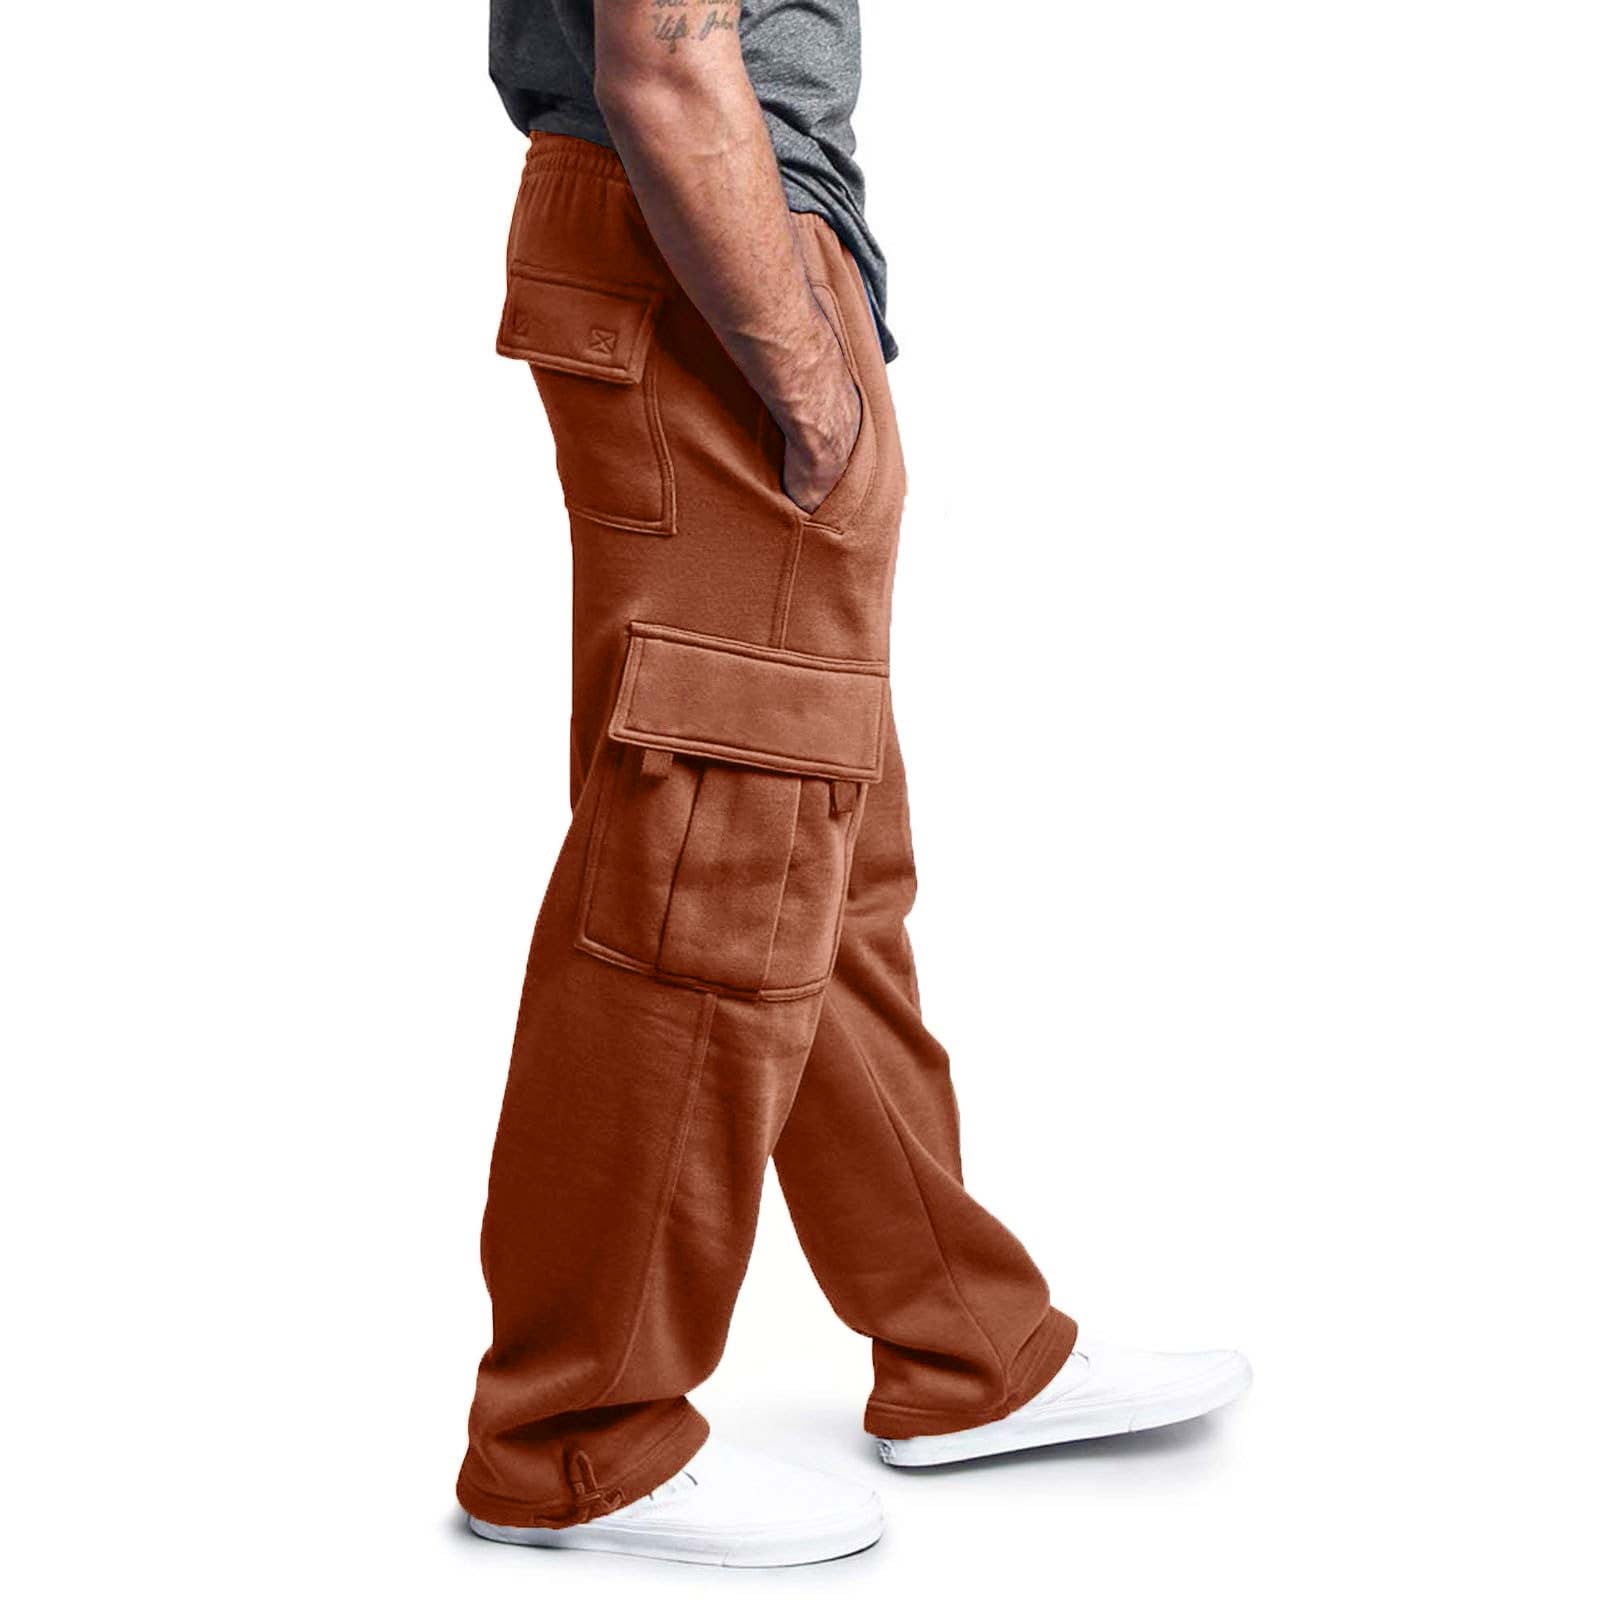  Ropa Deportiva para Hombre Chocolate Brown Sweatpants Men Cargo  Pants for Men Pants Cargo for Man Drip Pants Bone Sweatpants Men Summer  Sweatpants for Men Prime Big Deal Days : Clothing